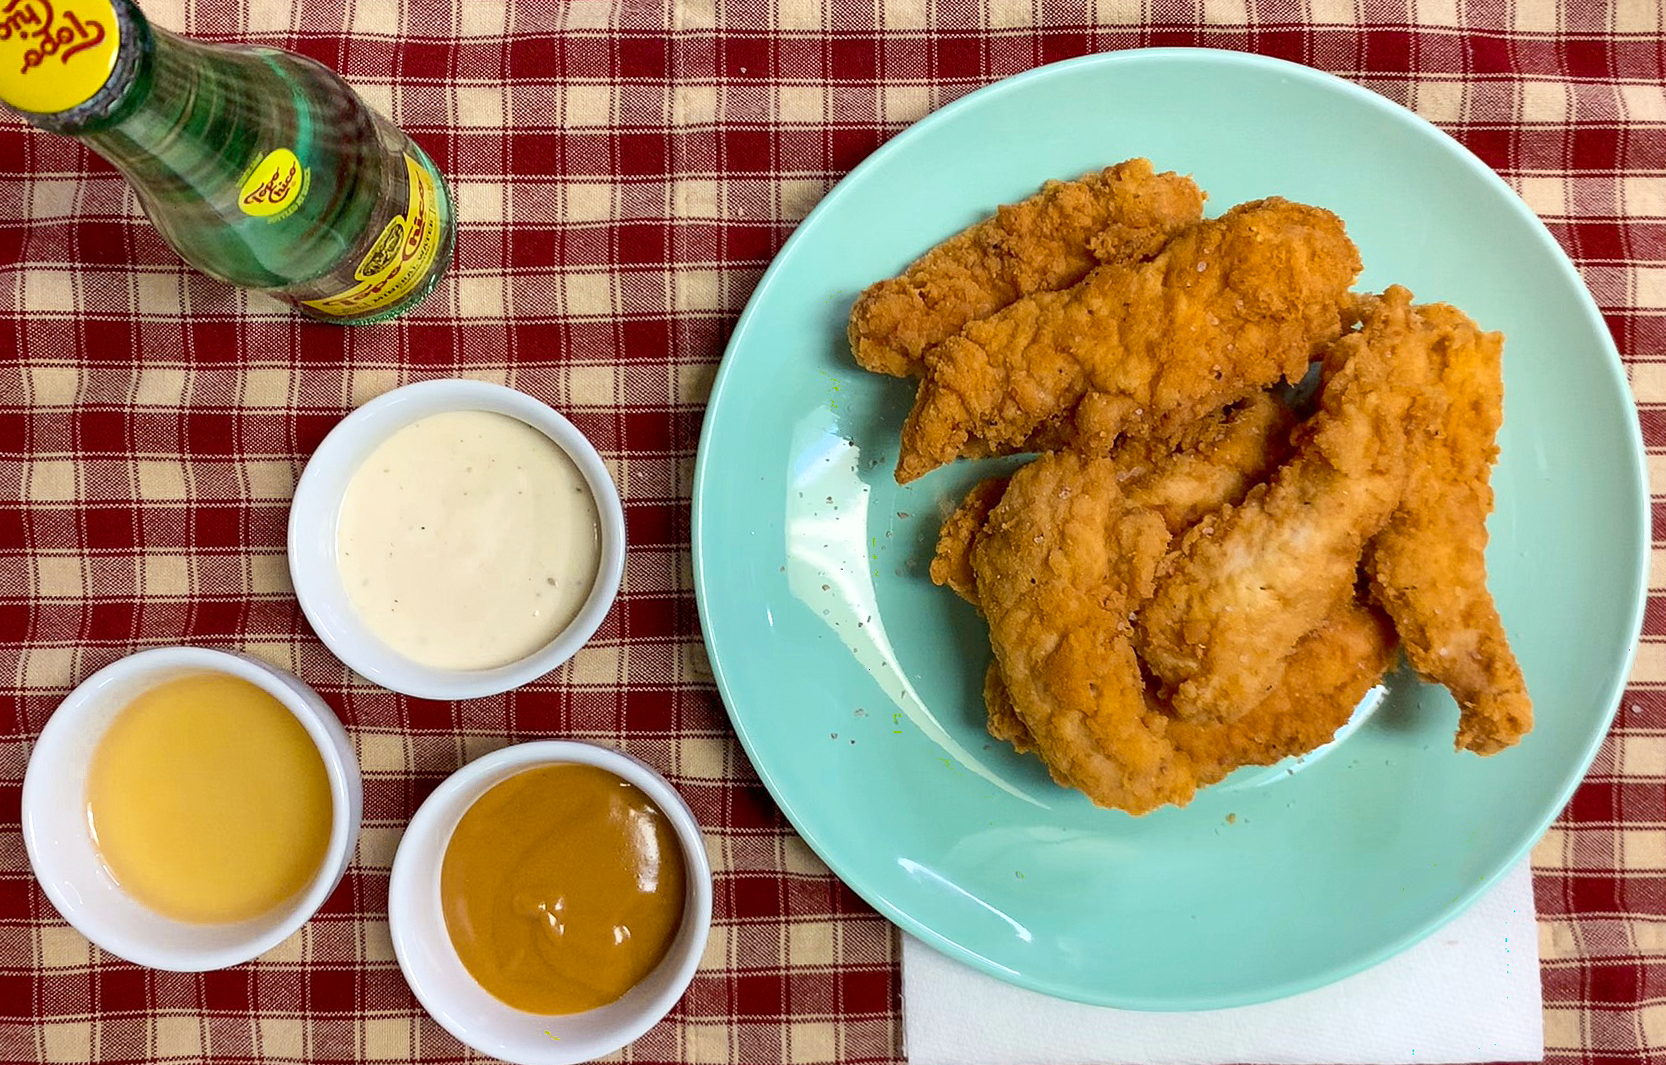 Keto Fried Chicken Tenders With Sauces